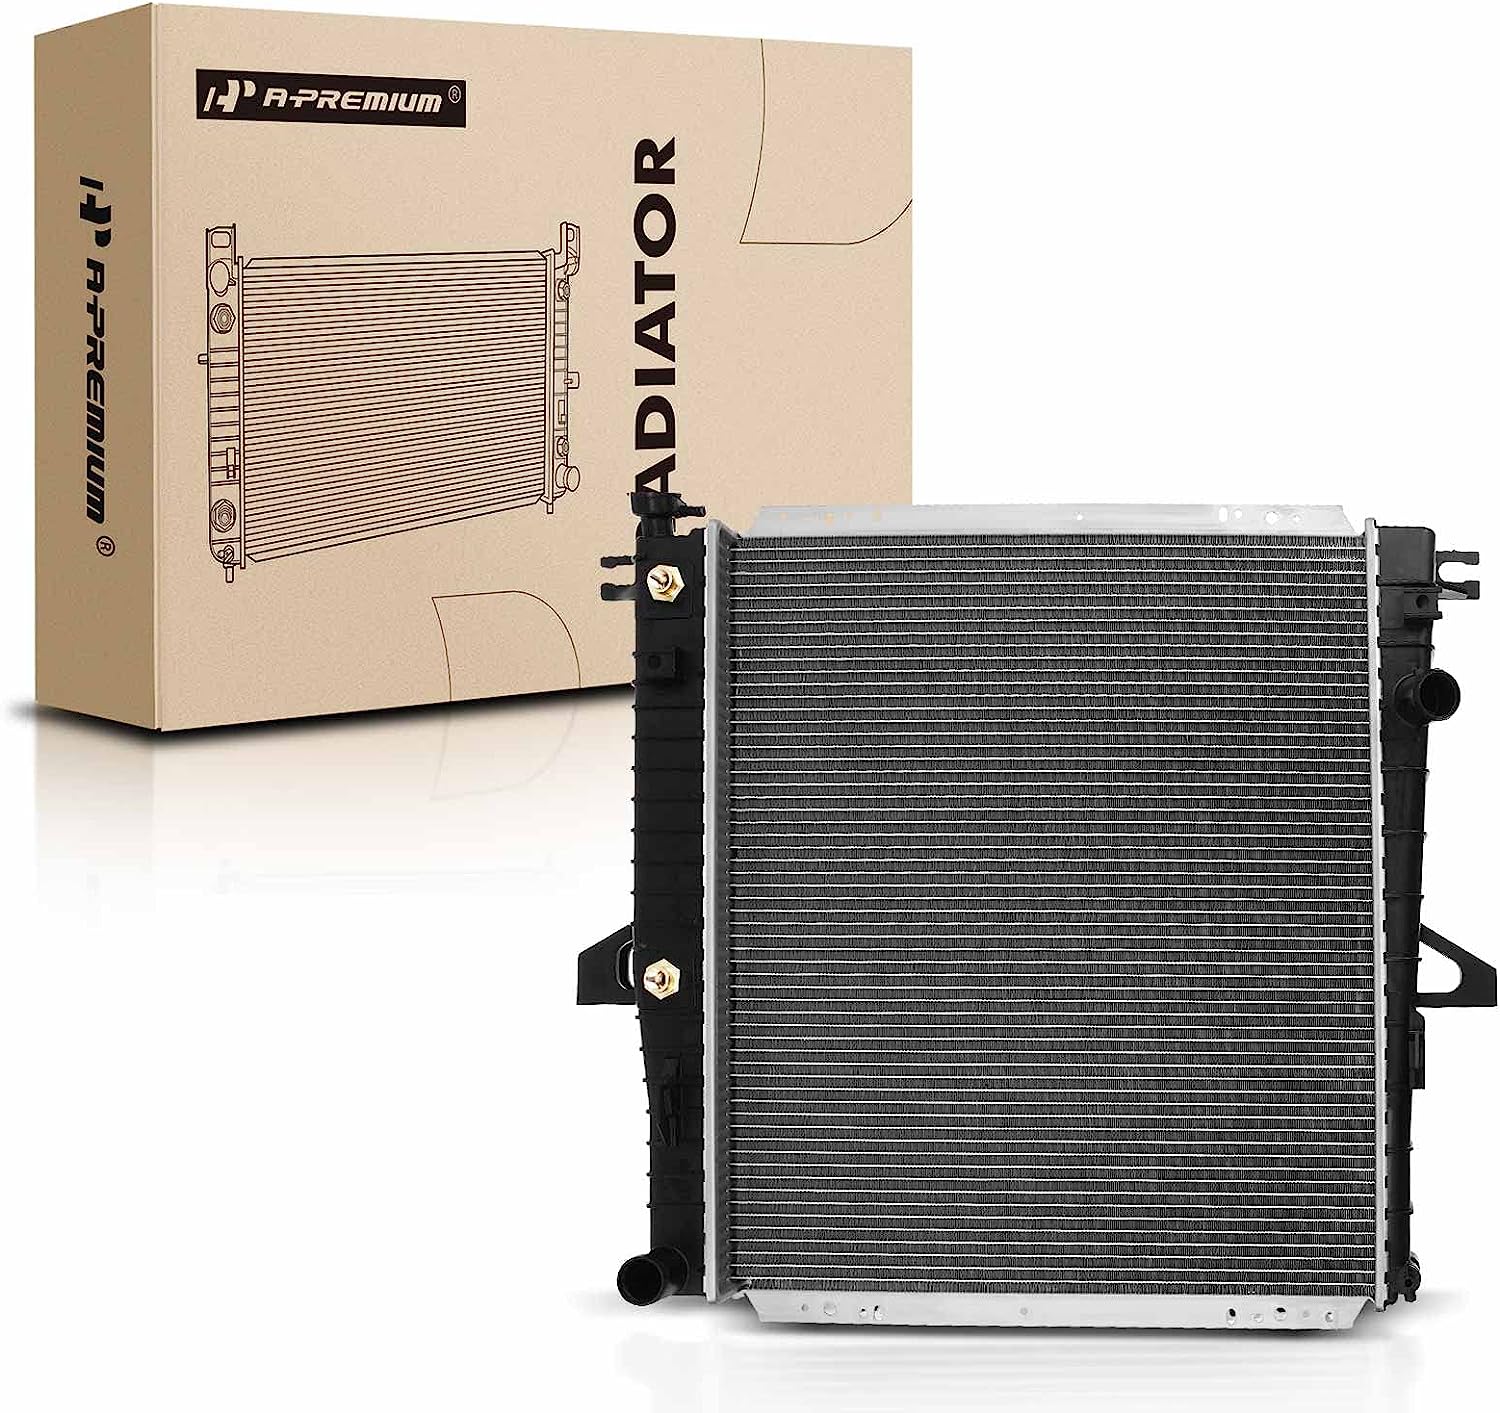 A-Premium Engine Coolant Radiator with Transmission Oil Cooler Compatible with Ford Explorer, Ranger Sport Trac & Mazda B3000 & Mercury Mountaineer, Automatic Trans, Replace# 5L5Z8005A, 6L5Z8005CA - image 1 of 9